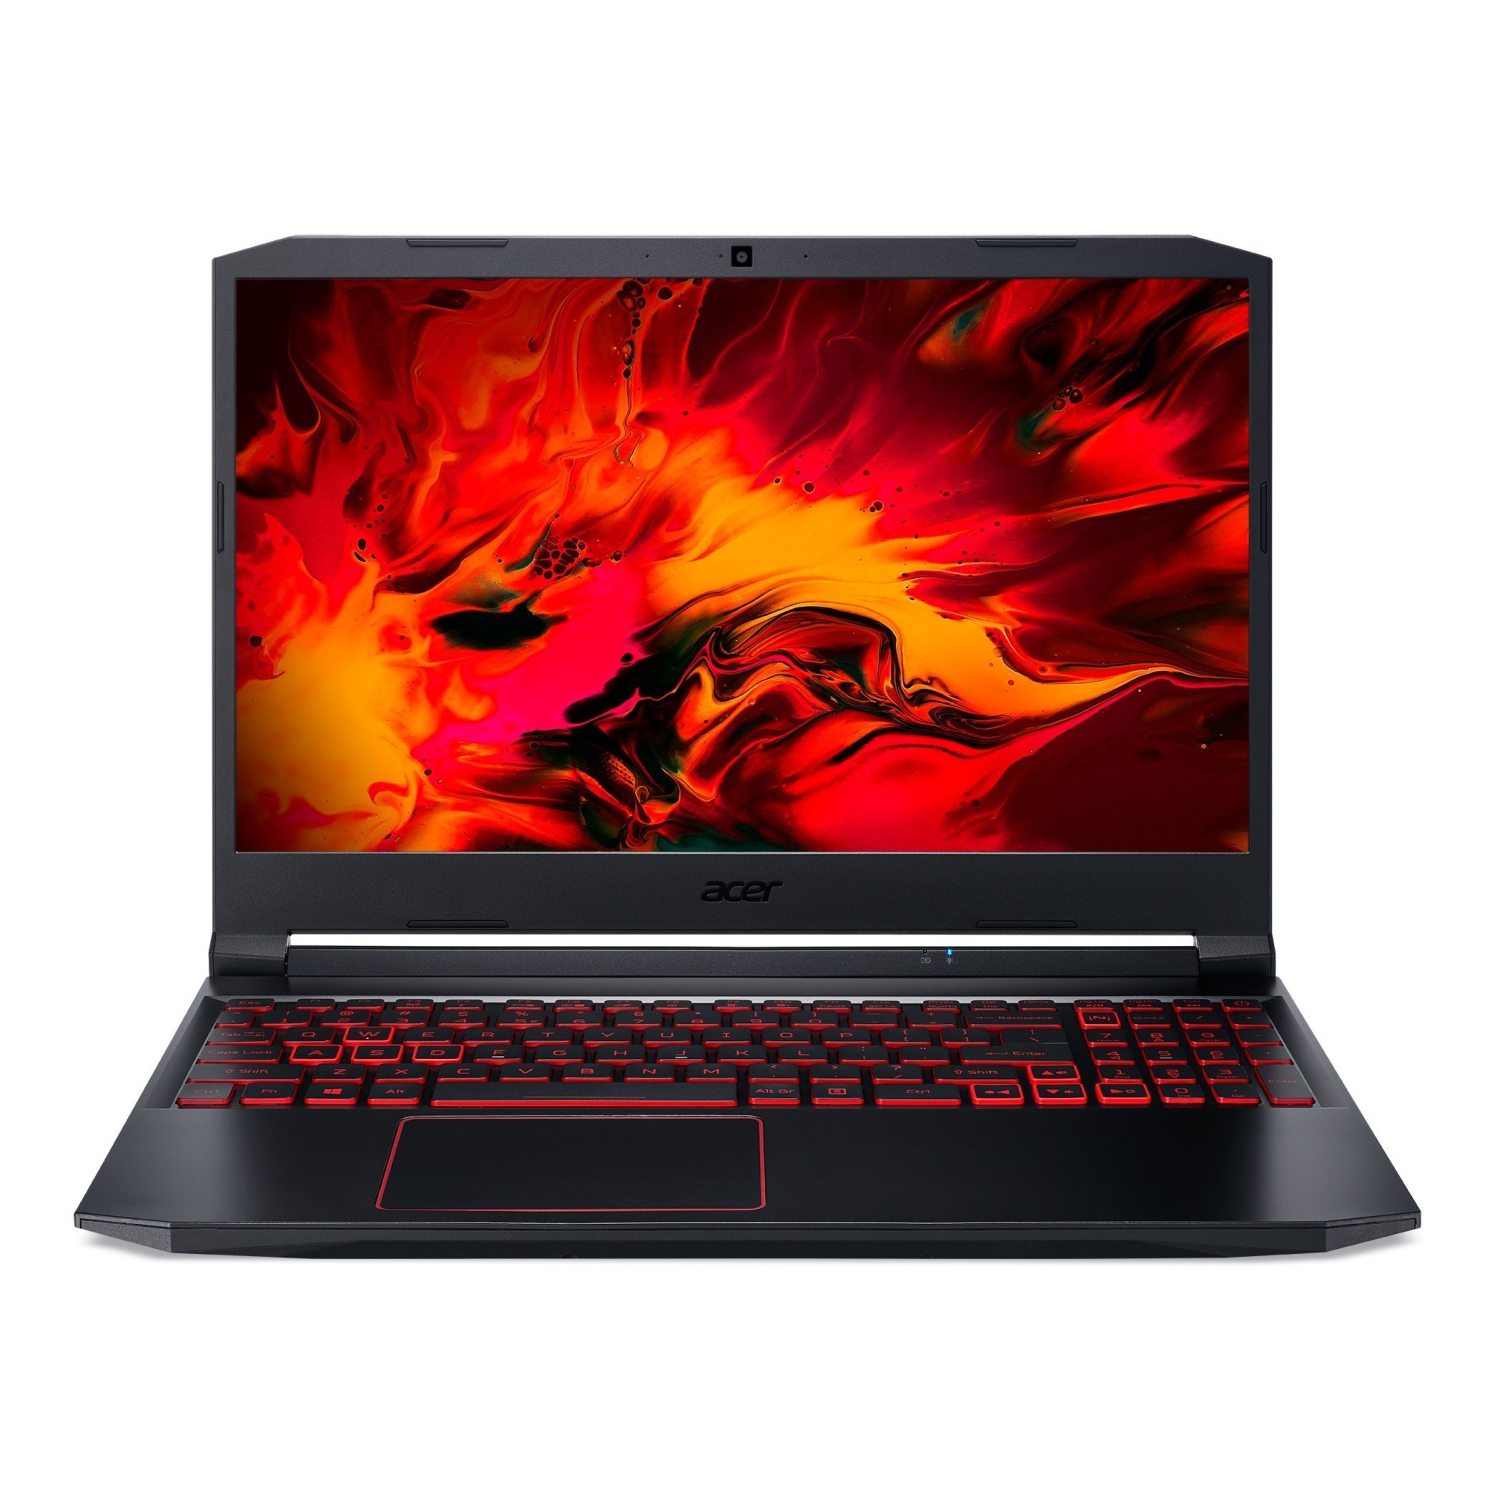 Refurbished (Excellent) - Acer 15.6" Nitro Gaming Laptop (Intel Core i7-10750H/512GB SSD/16GB RAM/Nvidia GTX 1650Ti/Win10) - Manufacturer ReCertified w/ 1 Year Warranty